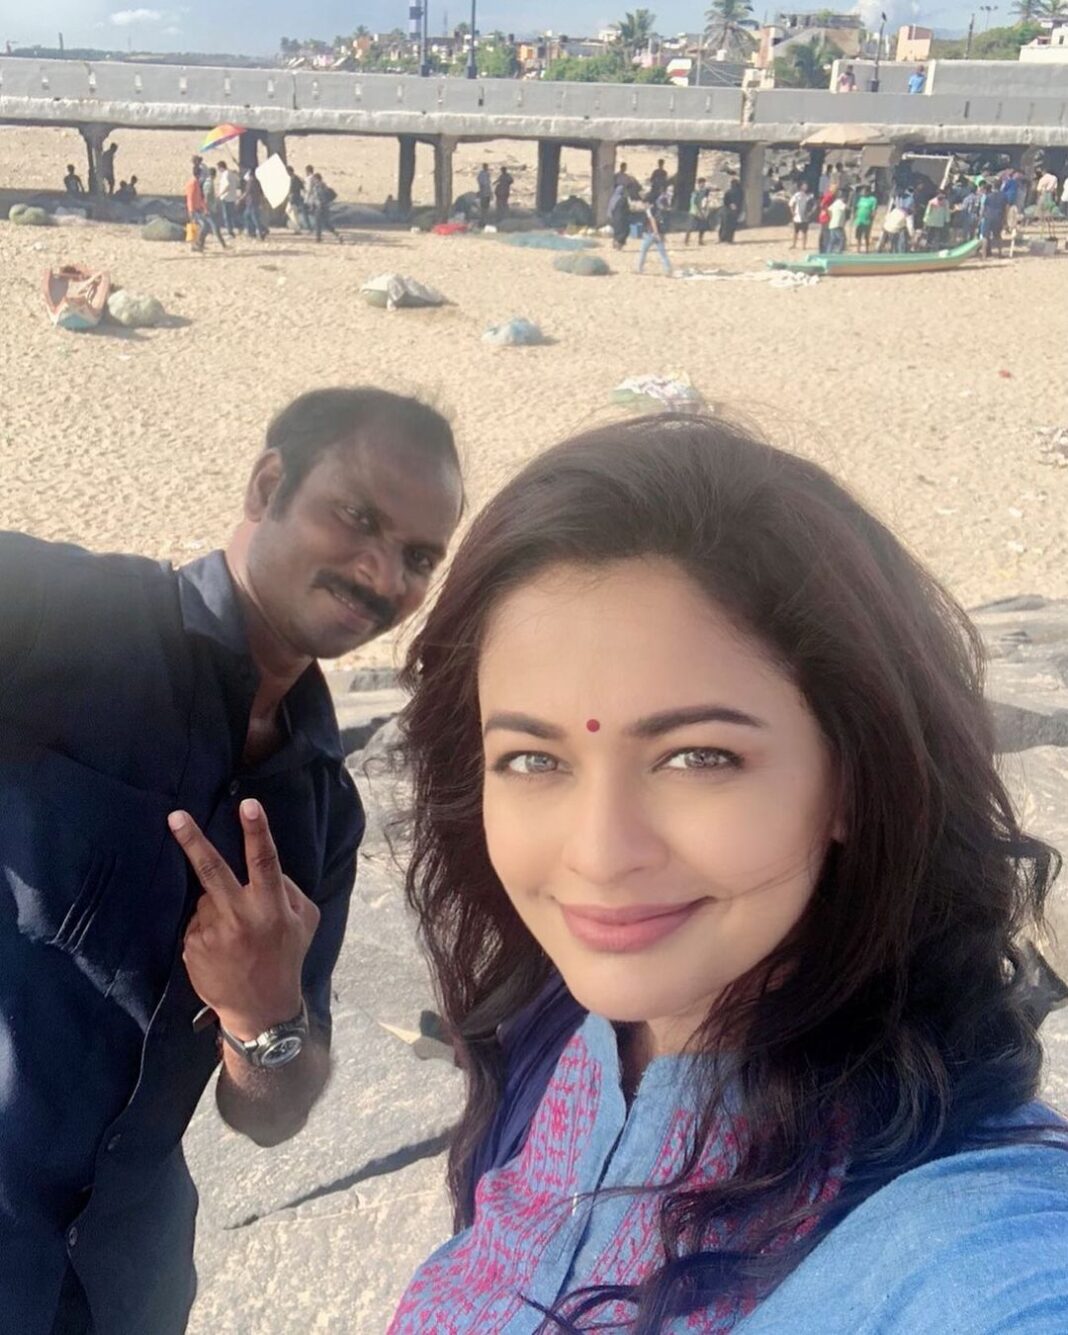 Pooja Kumar Instagram - Thank gosh my helper here was holding the umbrella! It was so hot 🥵 while waiting for the shot that I had to stand very far away while they were setting it up! Have you seen #forbiddenlove on #zee5cinepremium? #priyadarshan #anamika #womeninfilm #womenempowerment #hindi #india #tamil #telugu